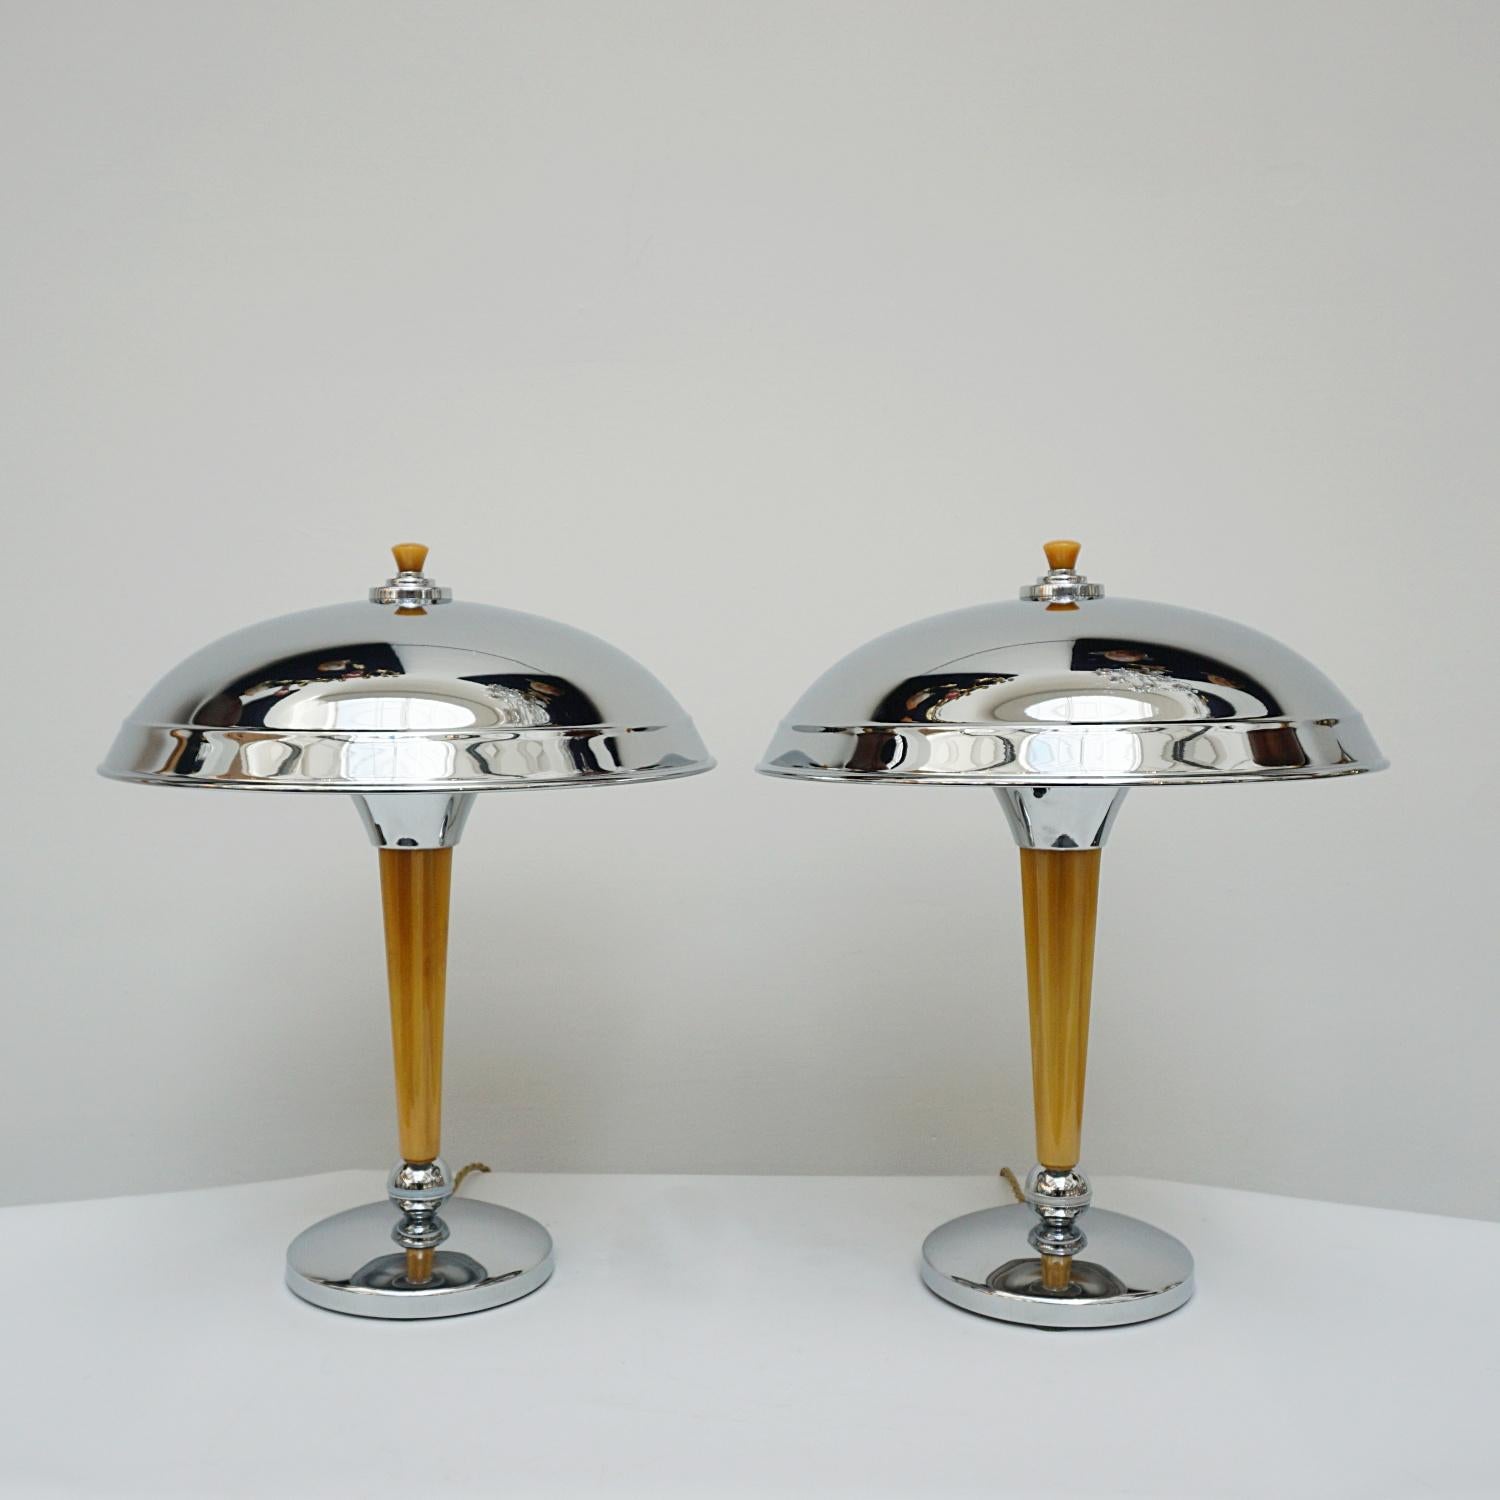 A Pair of Art Deco style dome lamps. Fluted tube of marbled yellow bakelite stem, set over a chromed metal base. Yellow finial topped chromed metal shade. 

Dimensions: H 44cm Diameter of shade: 35cm, of base: 16cm

All of our lighting is fully